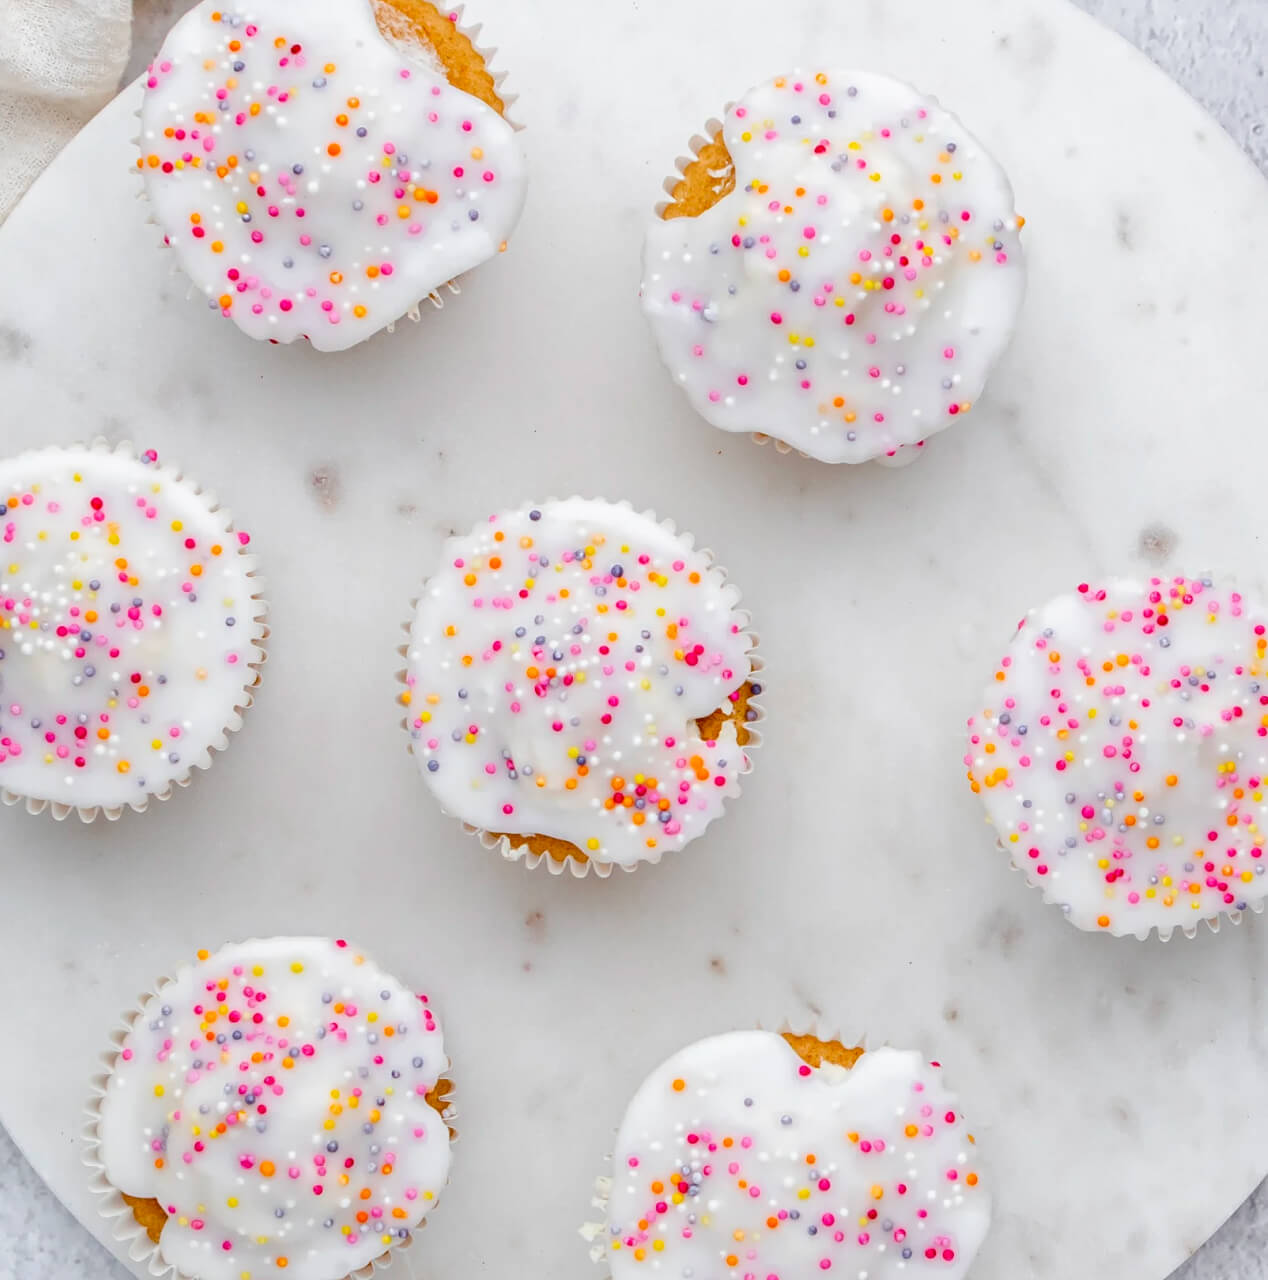 Pretty fairy cakes decorated with white icing and colourful sprinkles.